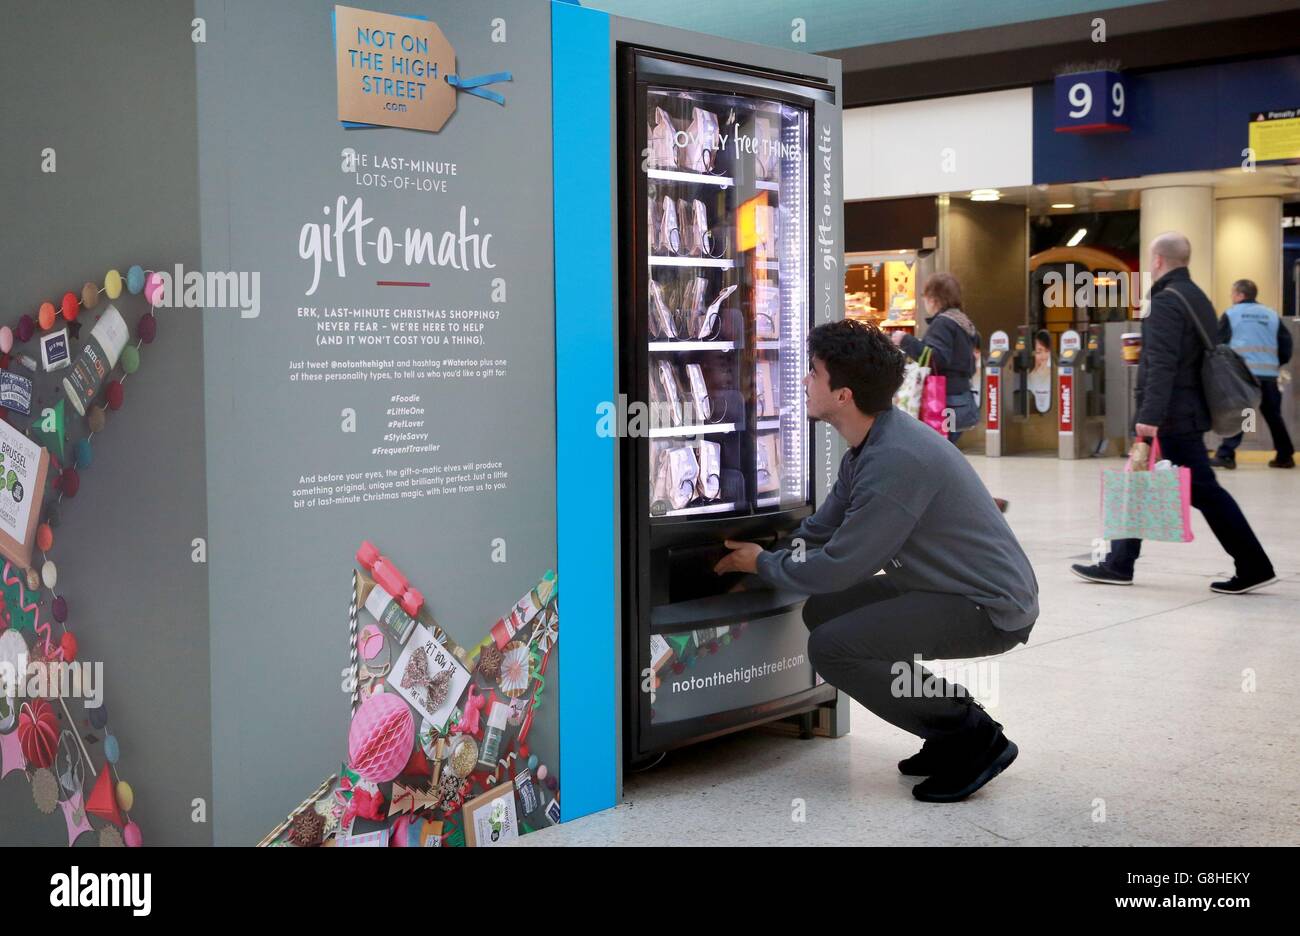 A commuter receives a gift from a 'Gift-O-Matic' machine, which offers free stocking filler gifts from notonthehighstreet.com, to take the stress out of last minute shopping at London Waterloo train station. Stock Photo